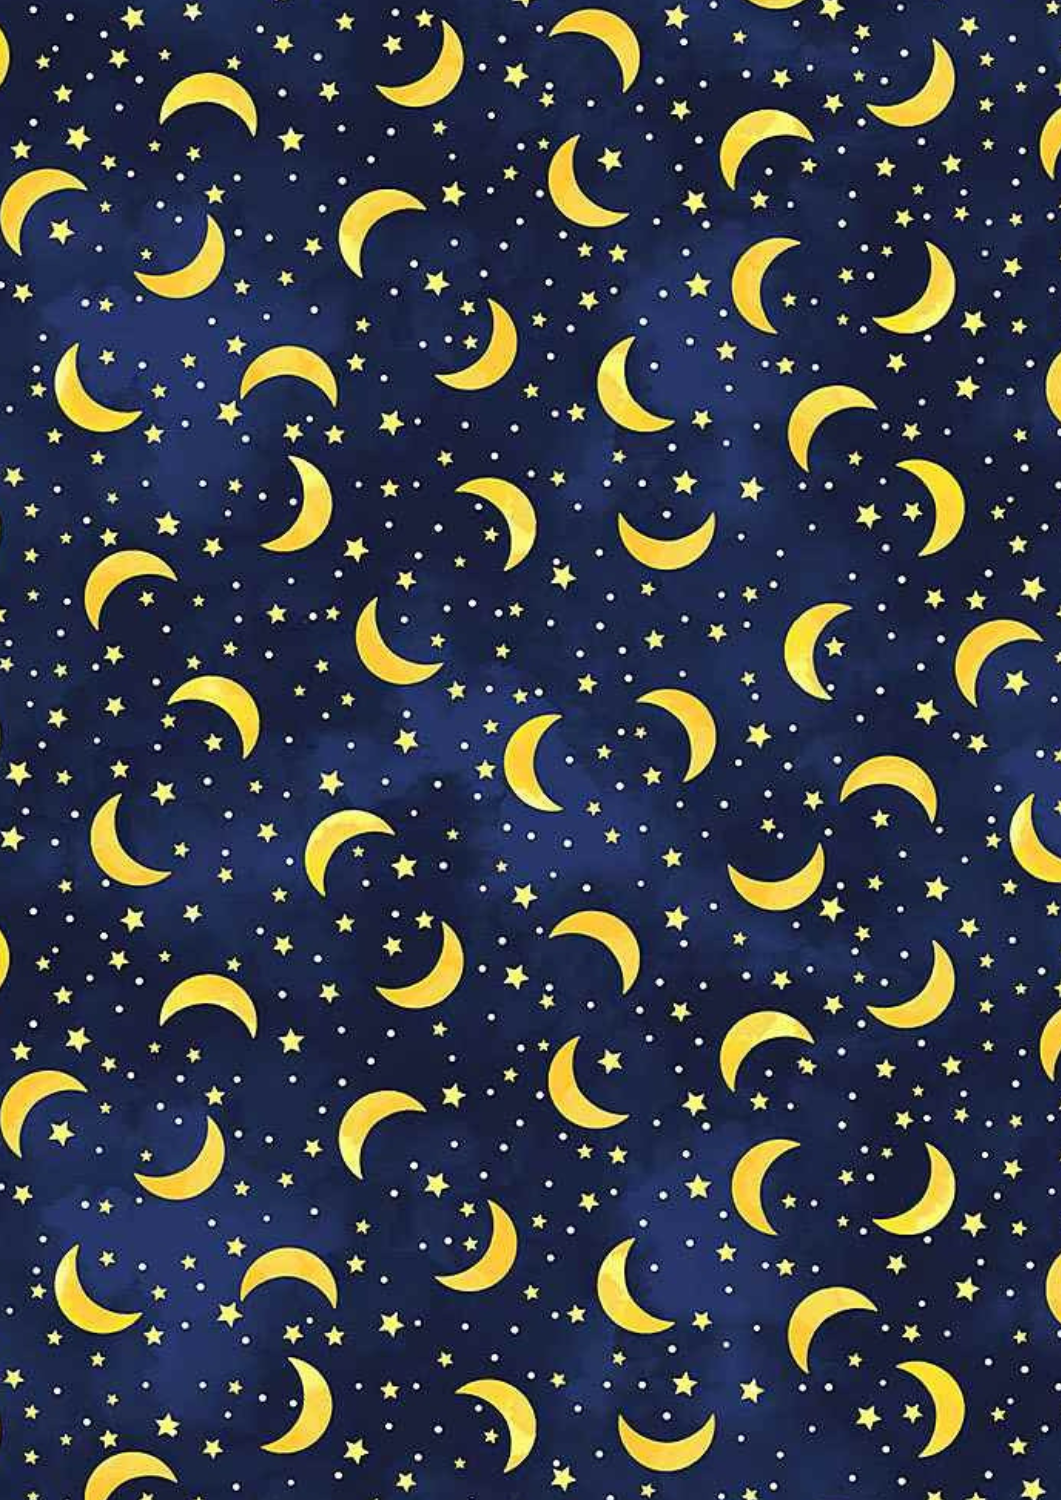 Love you to The Moon and Back with Celestial Fabrics Beginner Quilt Kit w/ Picture This Pattern